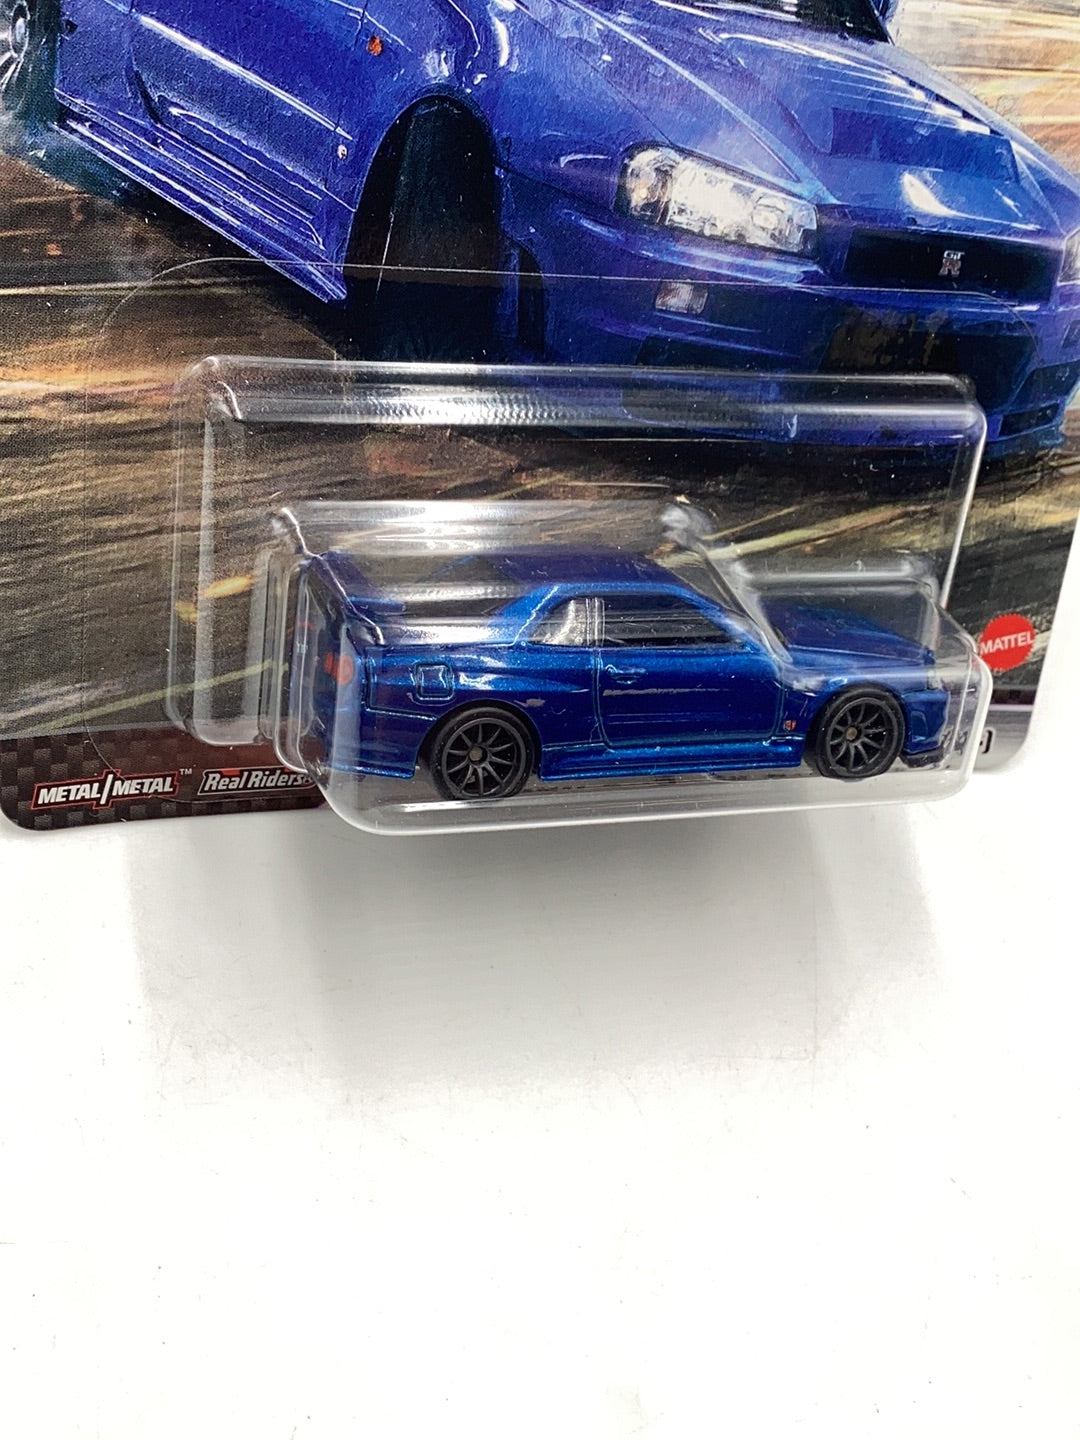 Hot wheels premium fast and furious Fast Superstars 1/5 Nissan skyline GTR BNR34 with protector